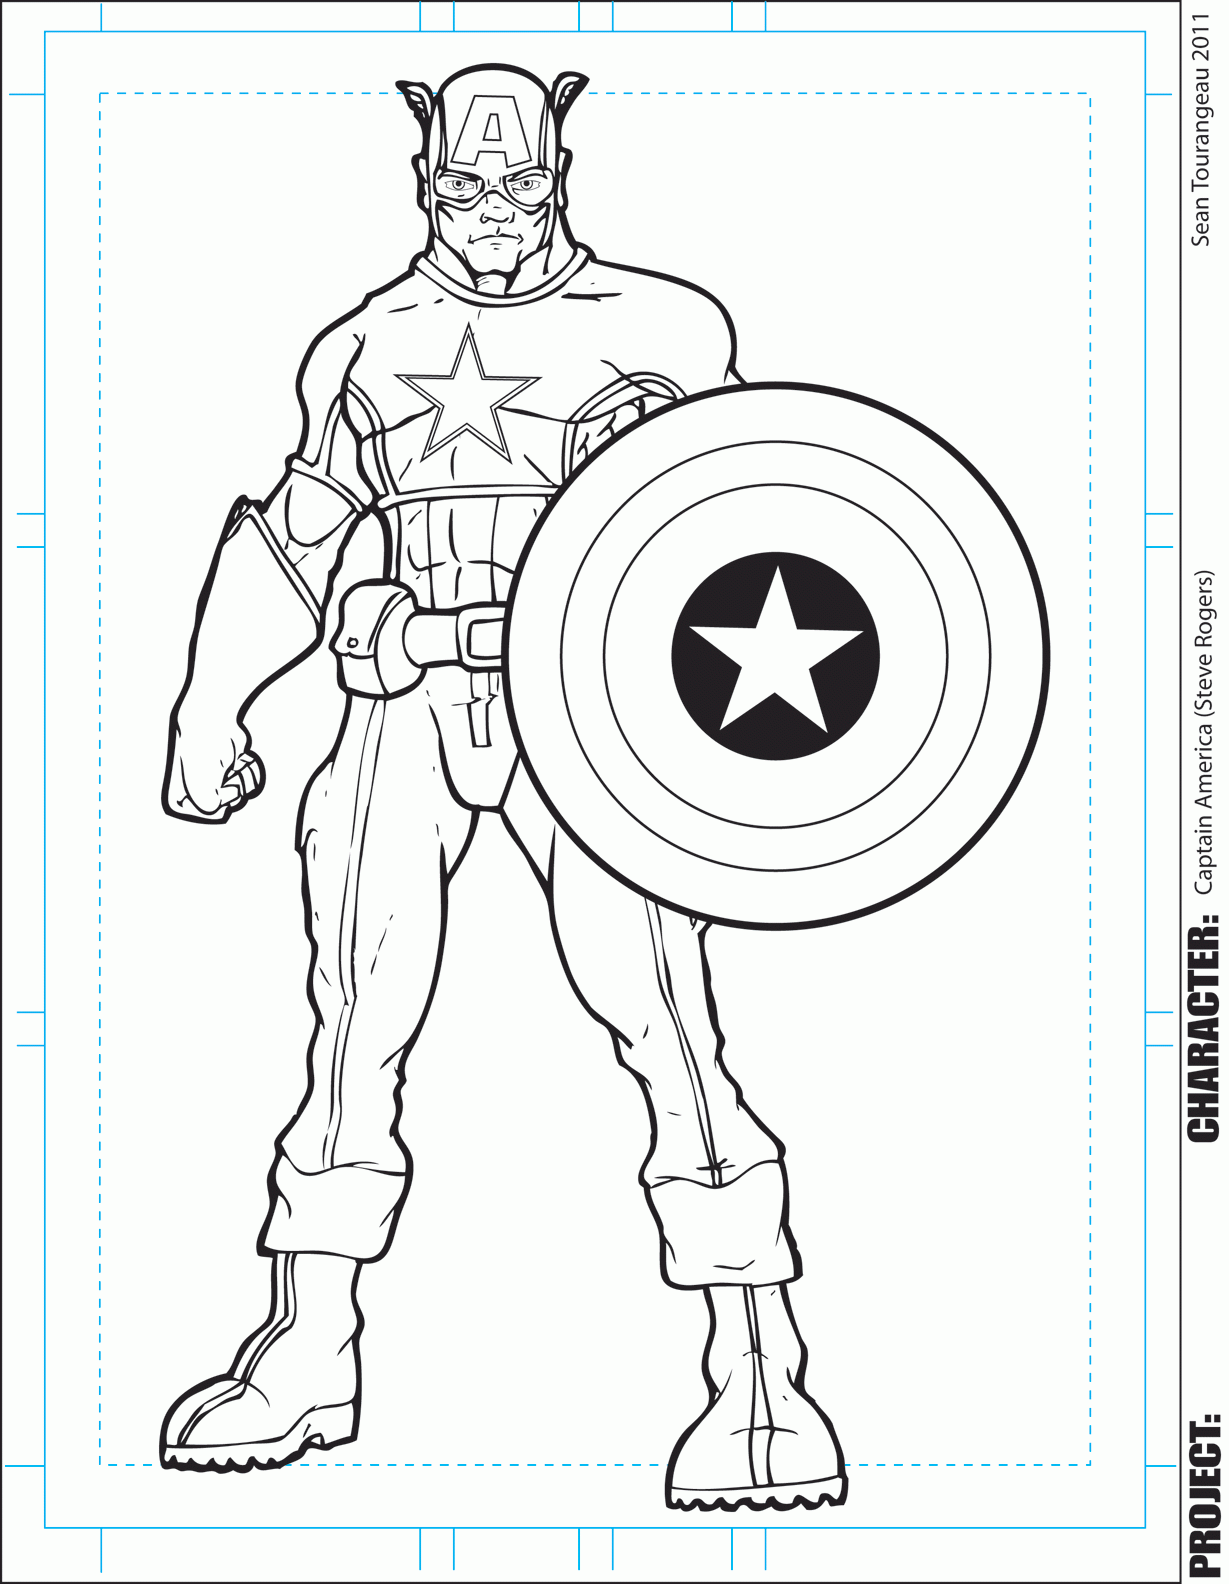 Captain America Coloring Pages To Print - Coloring Pages For All Ages